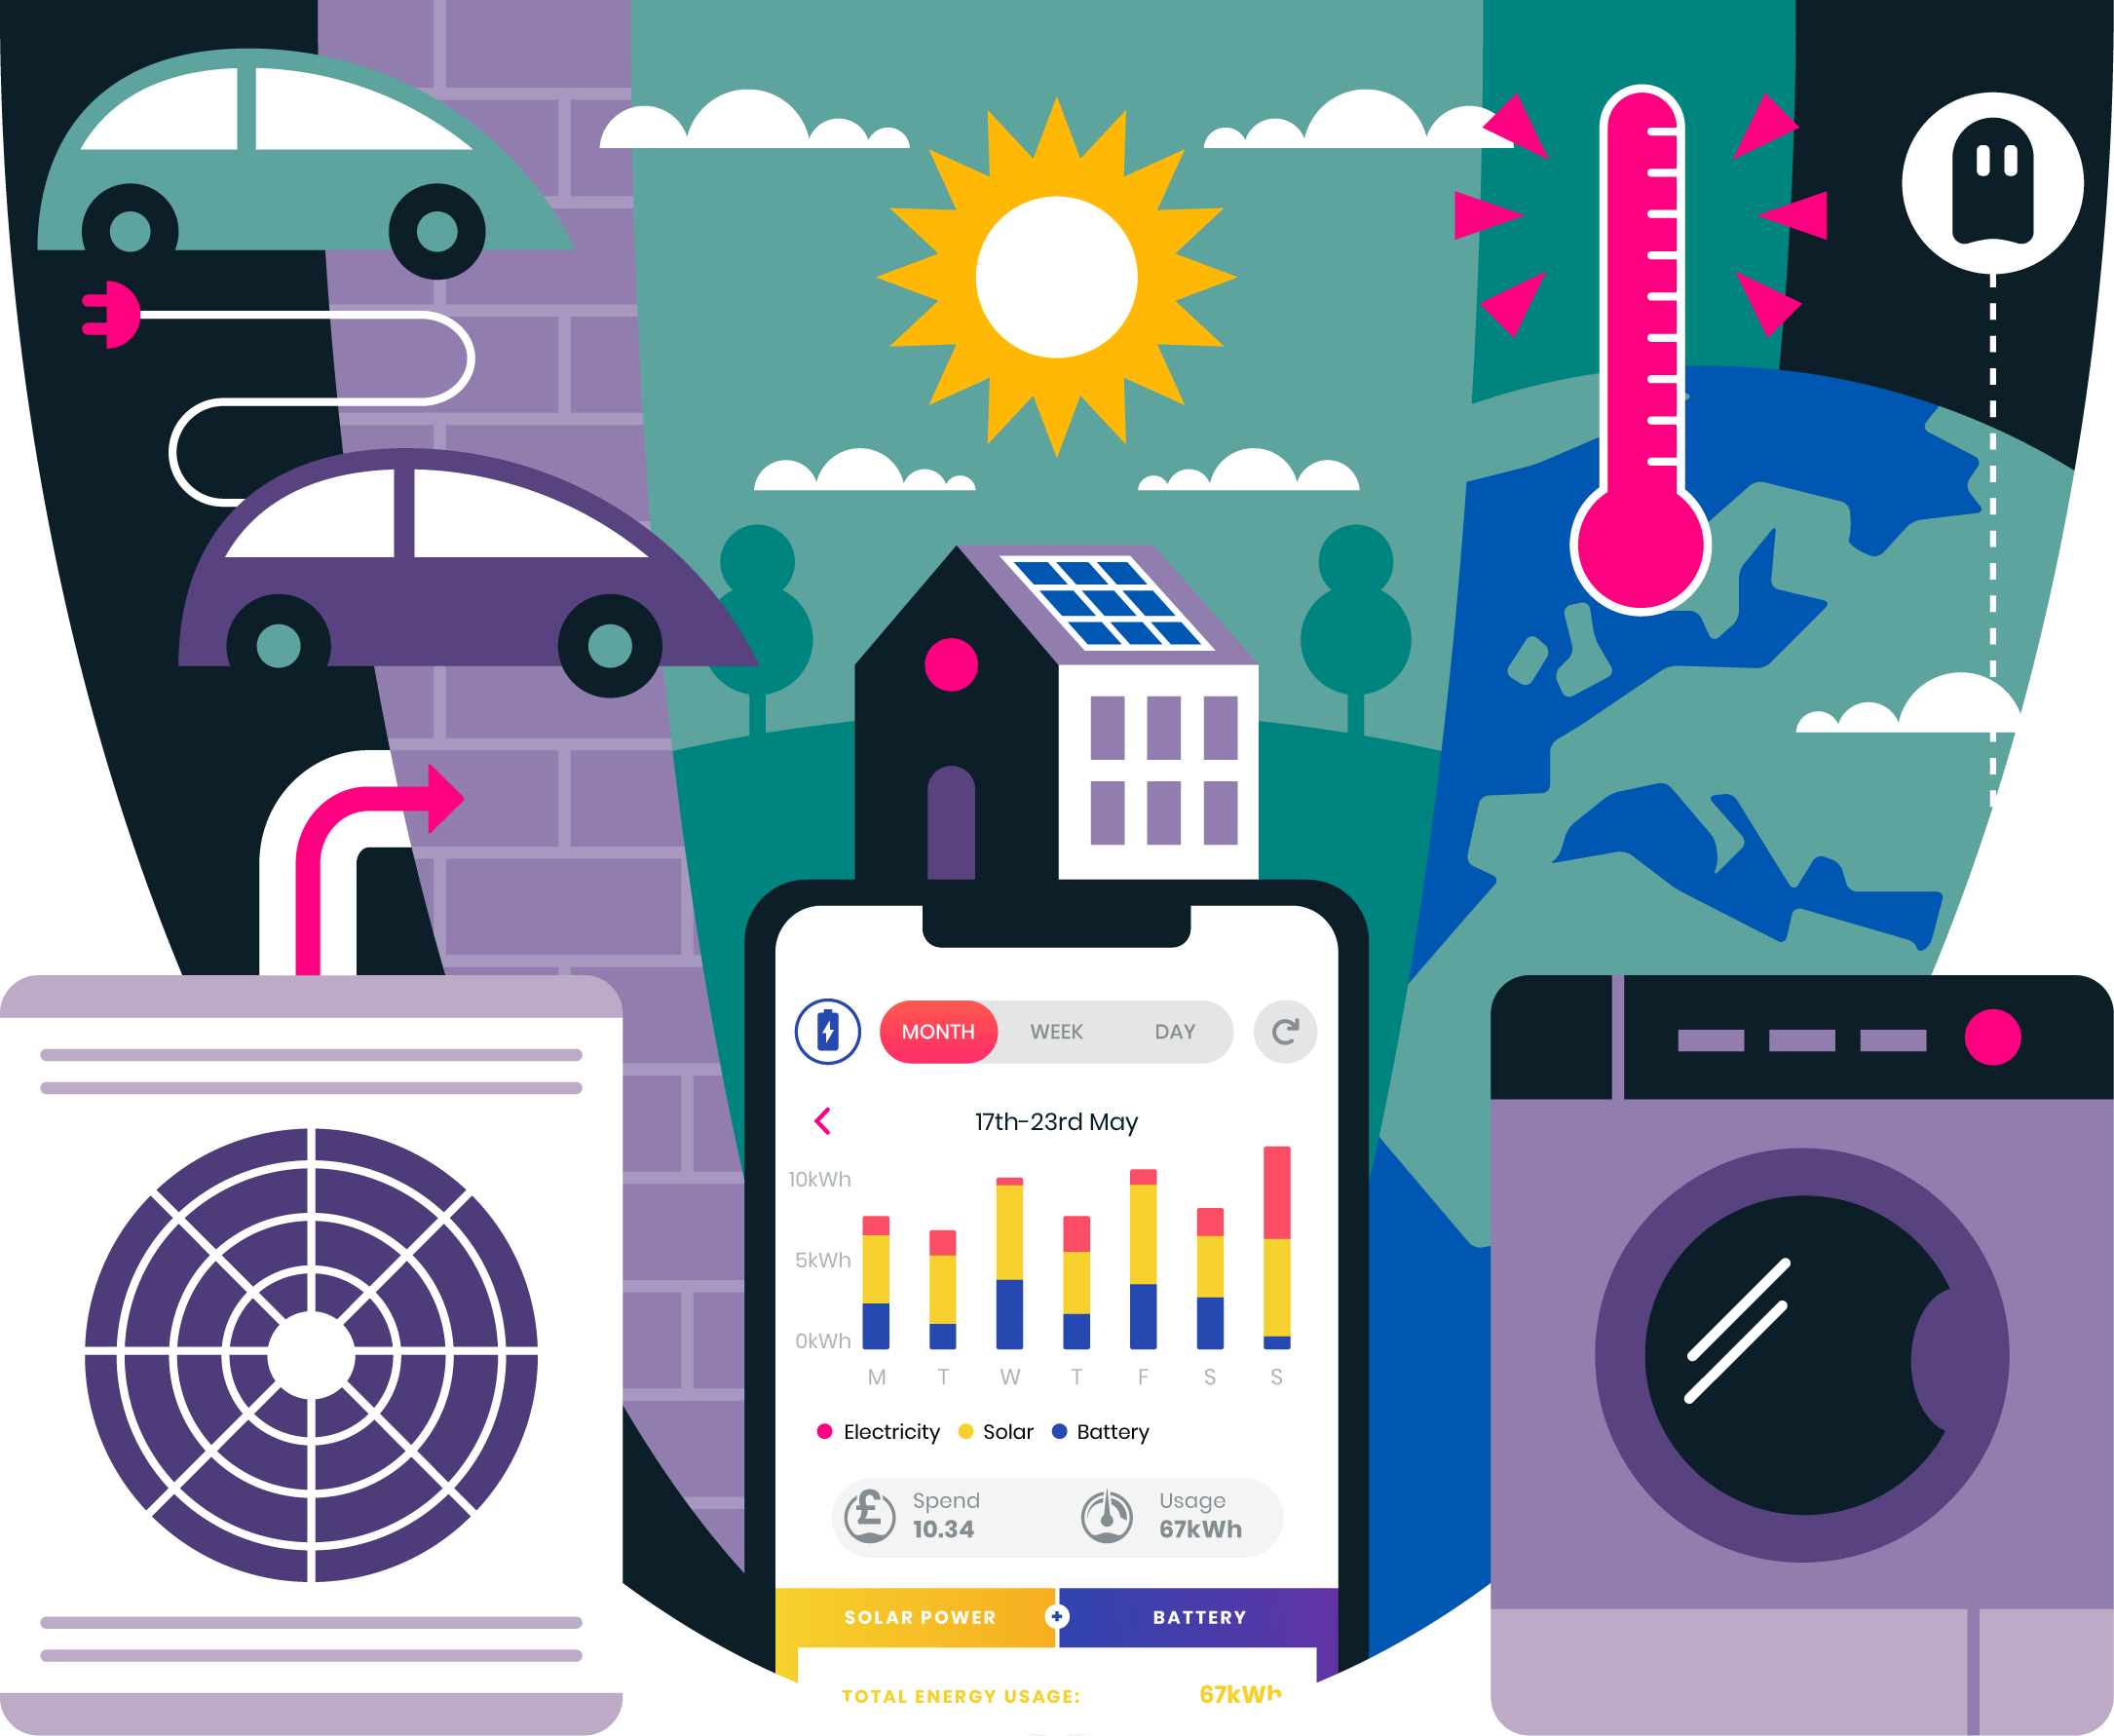 Loop weekly solar and electricity use in the foreground behind a collage featuring a heat pump, washing machine, thermometer, phantom, sun and electric vehicles